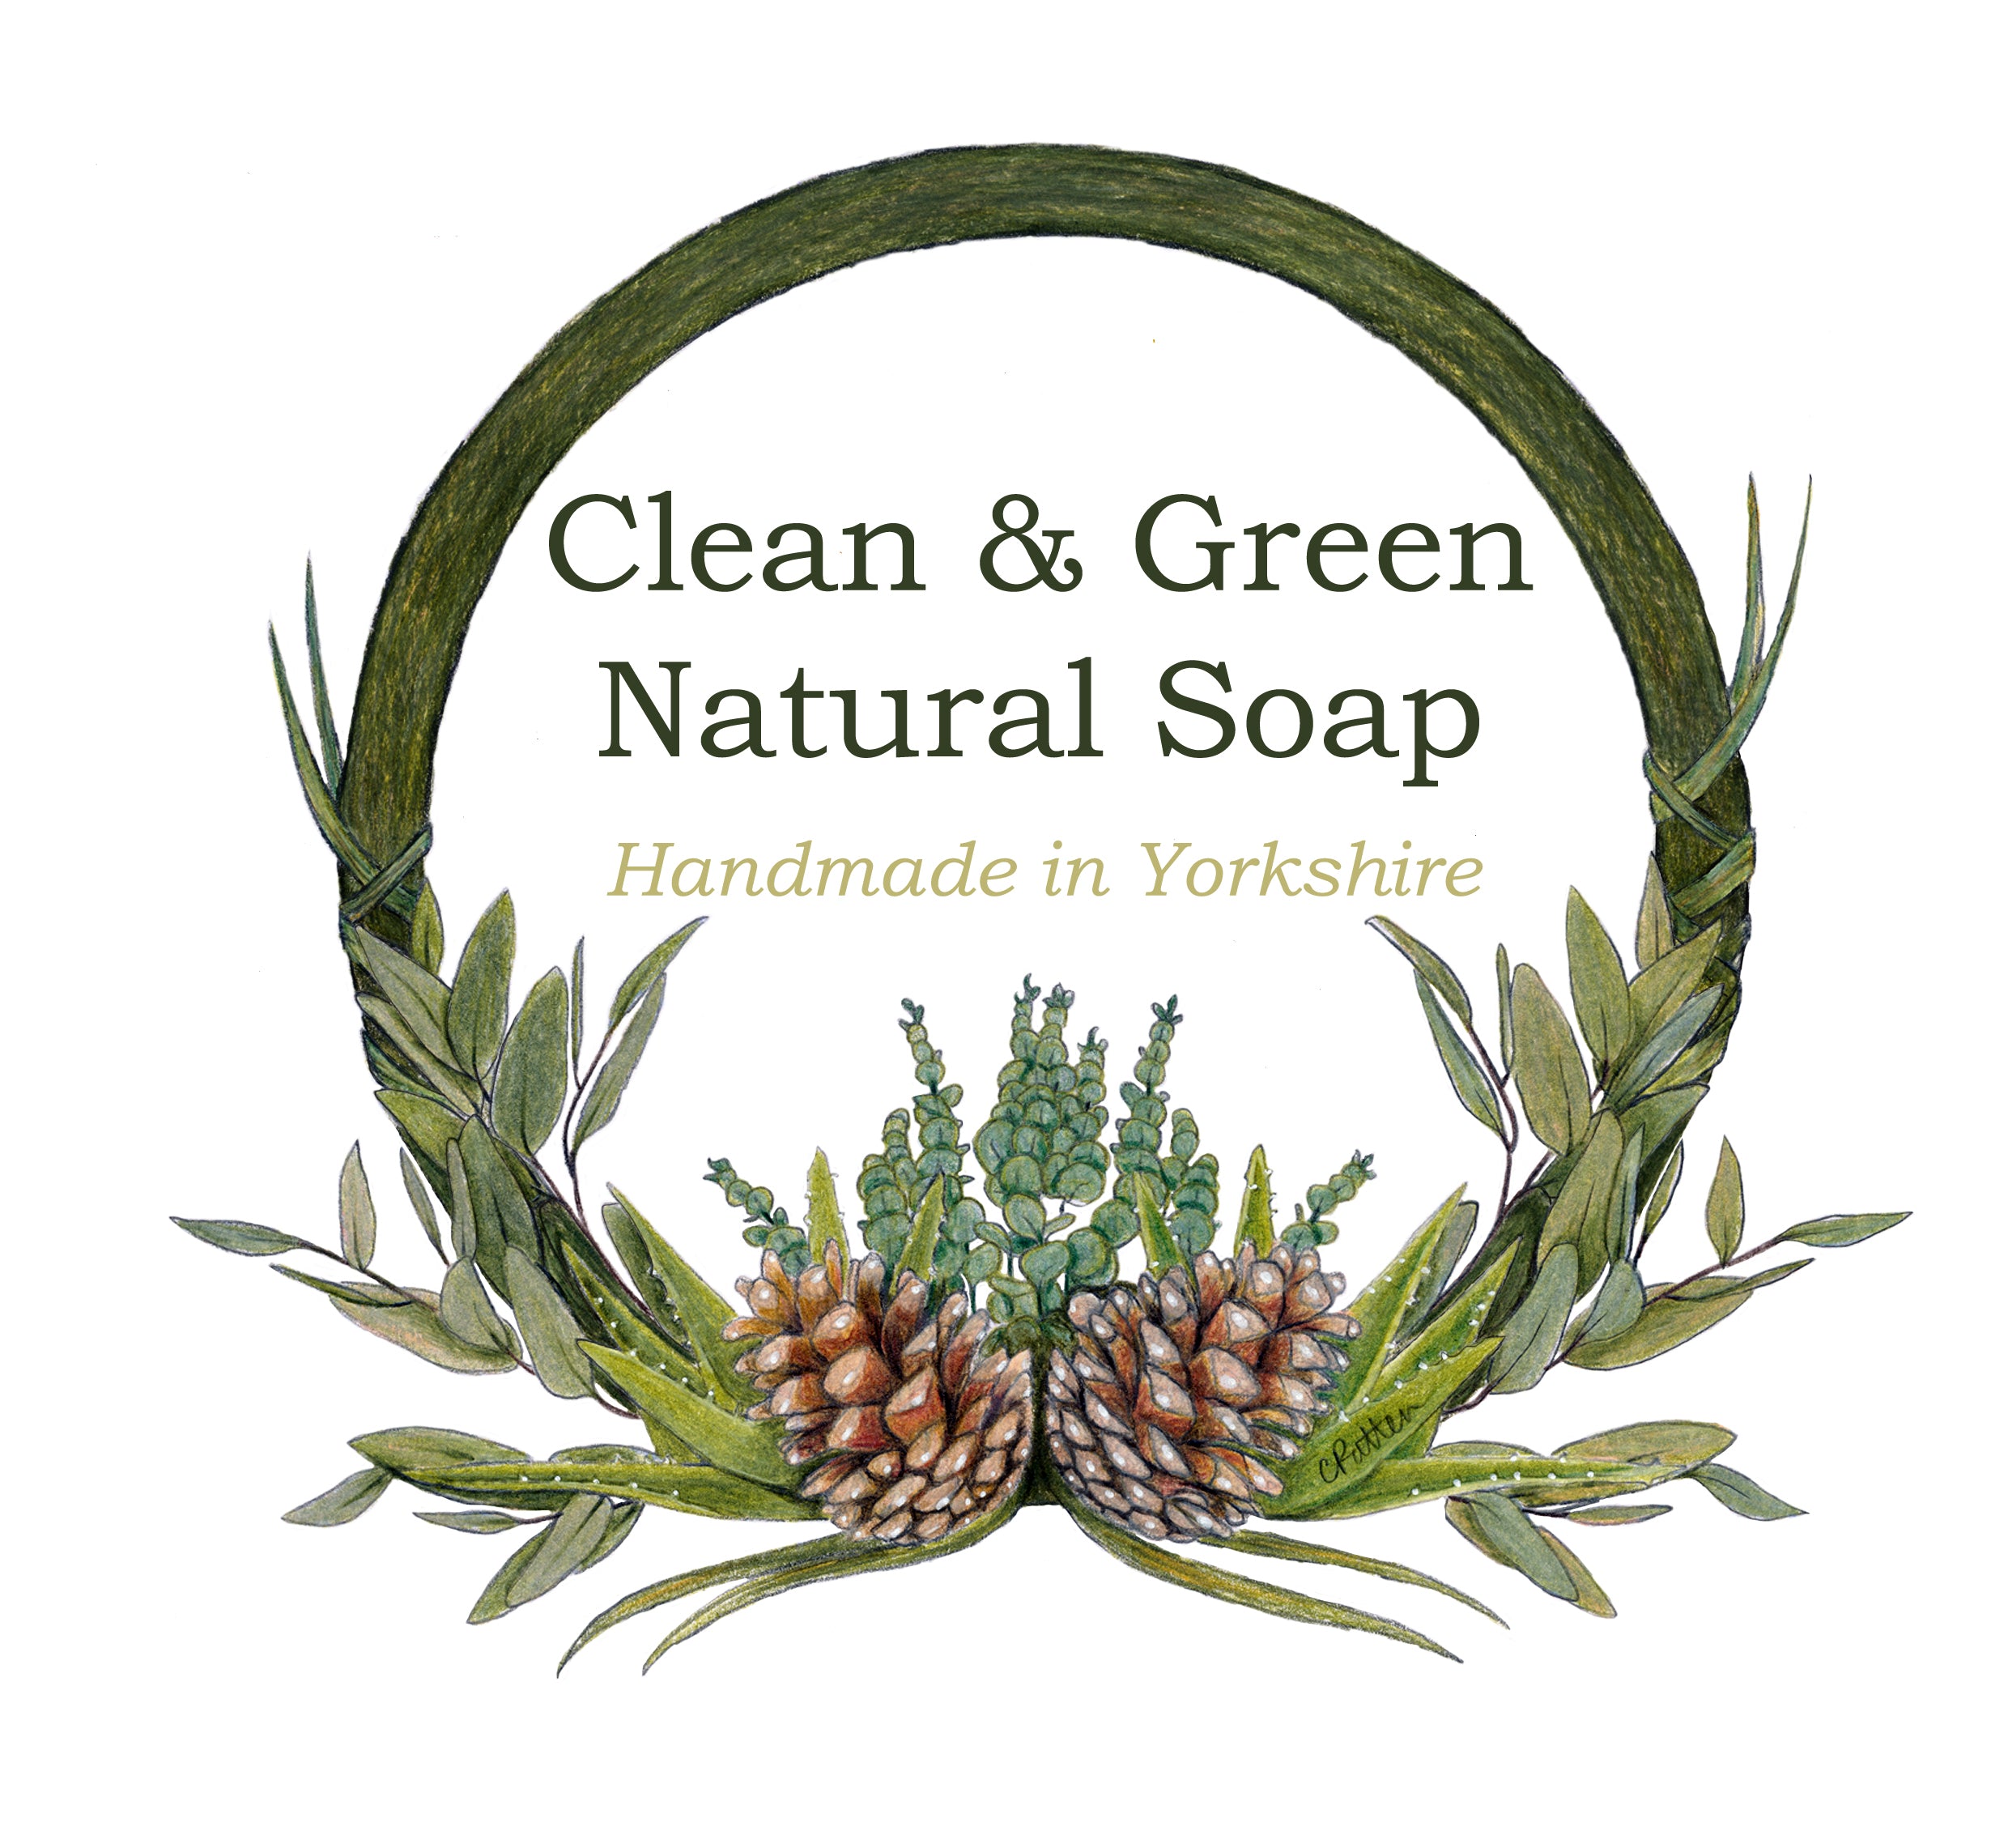 www.cleanandgreennaturalsoap.co.uk